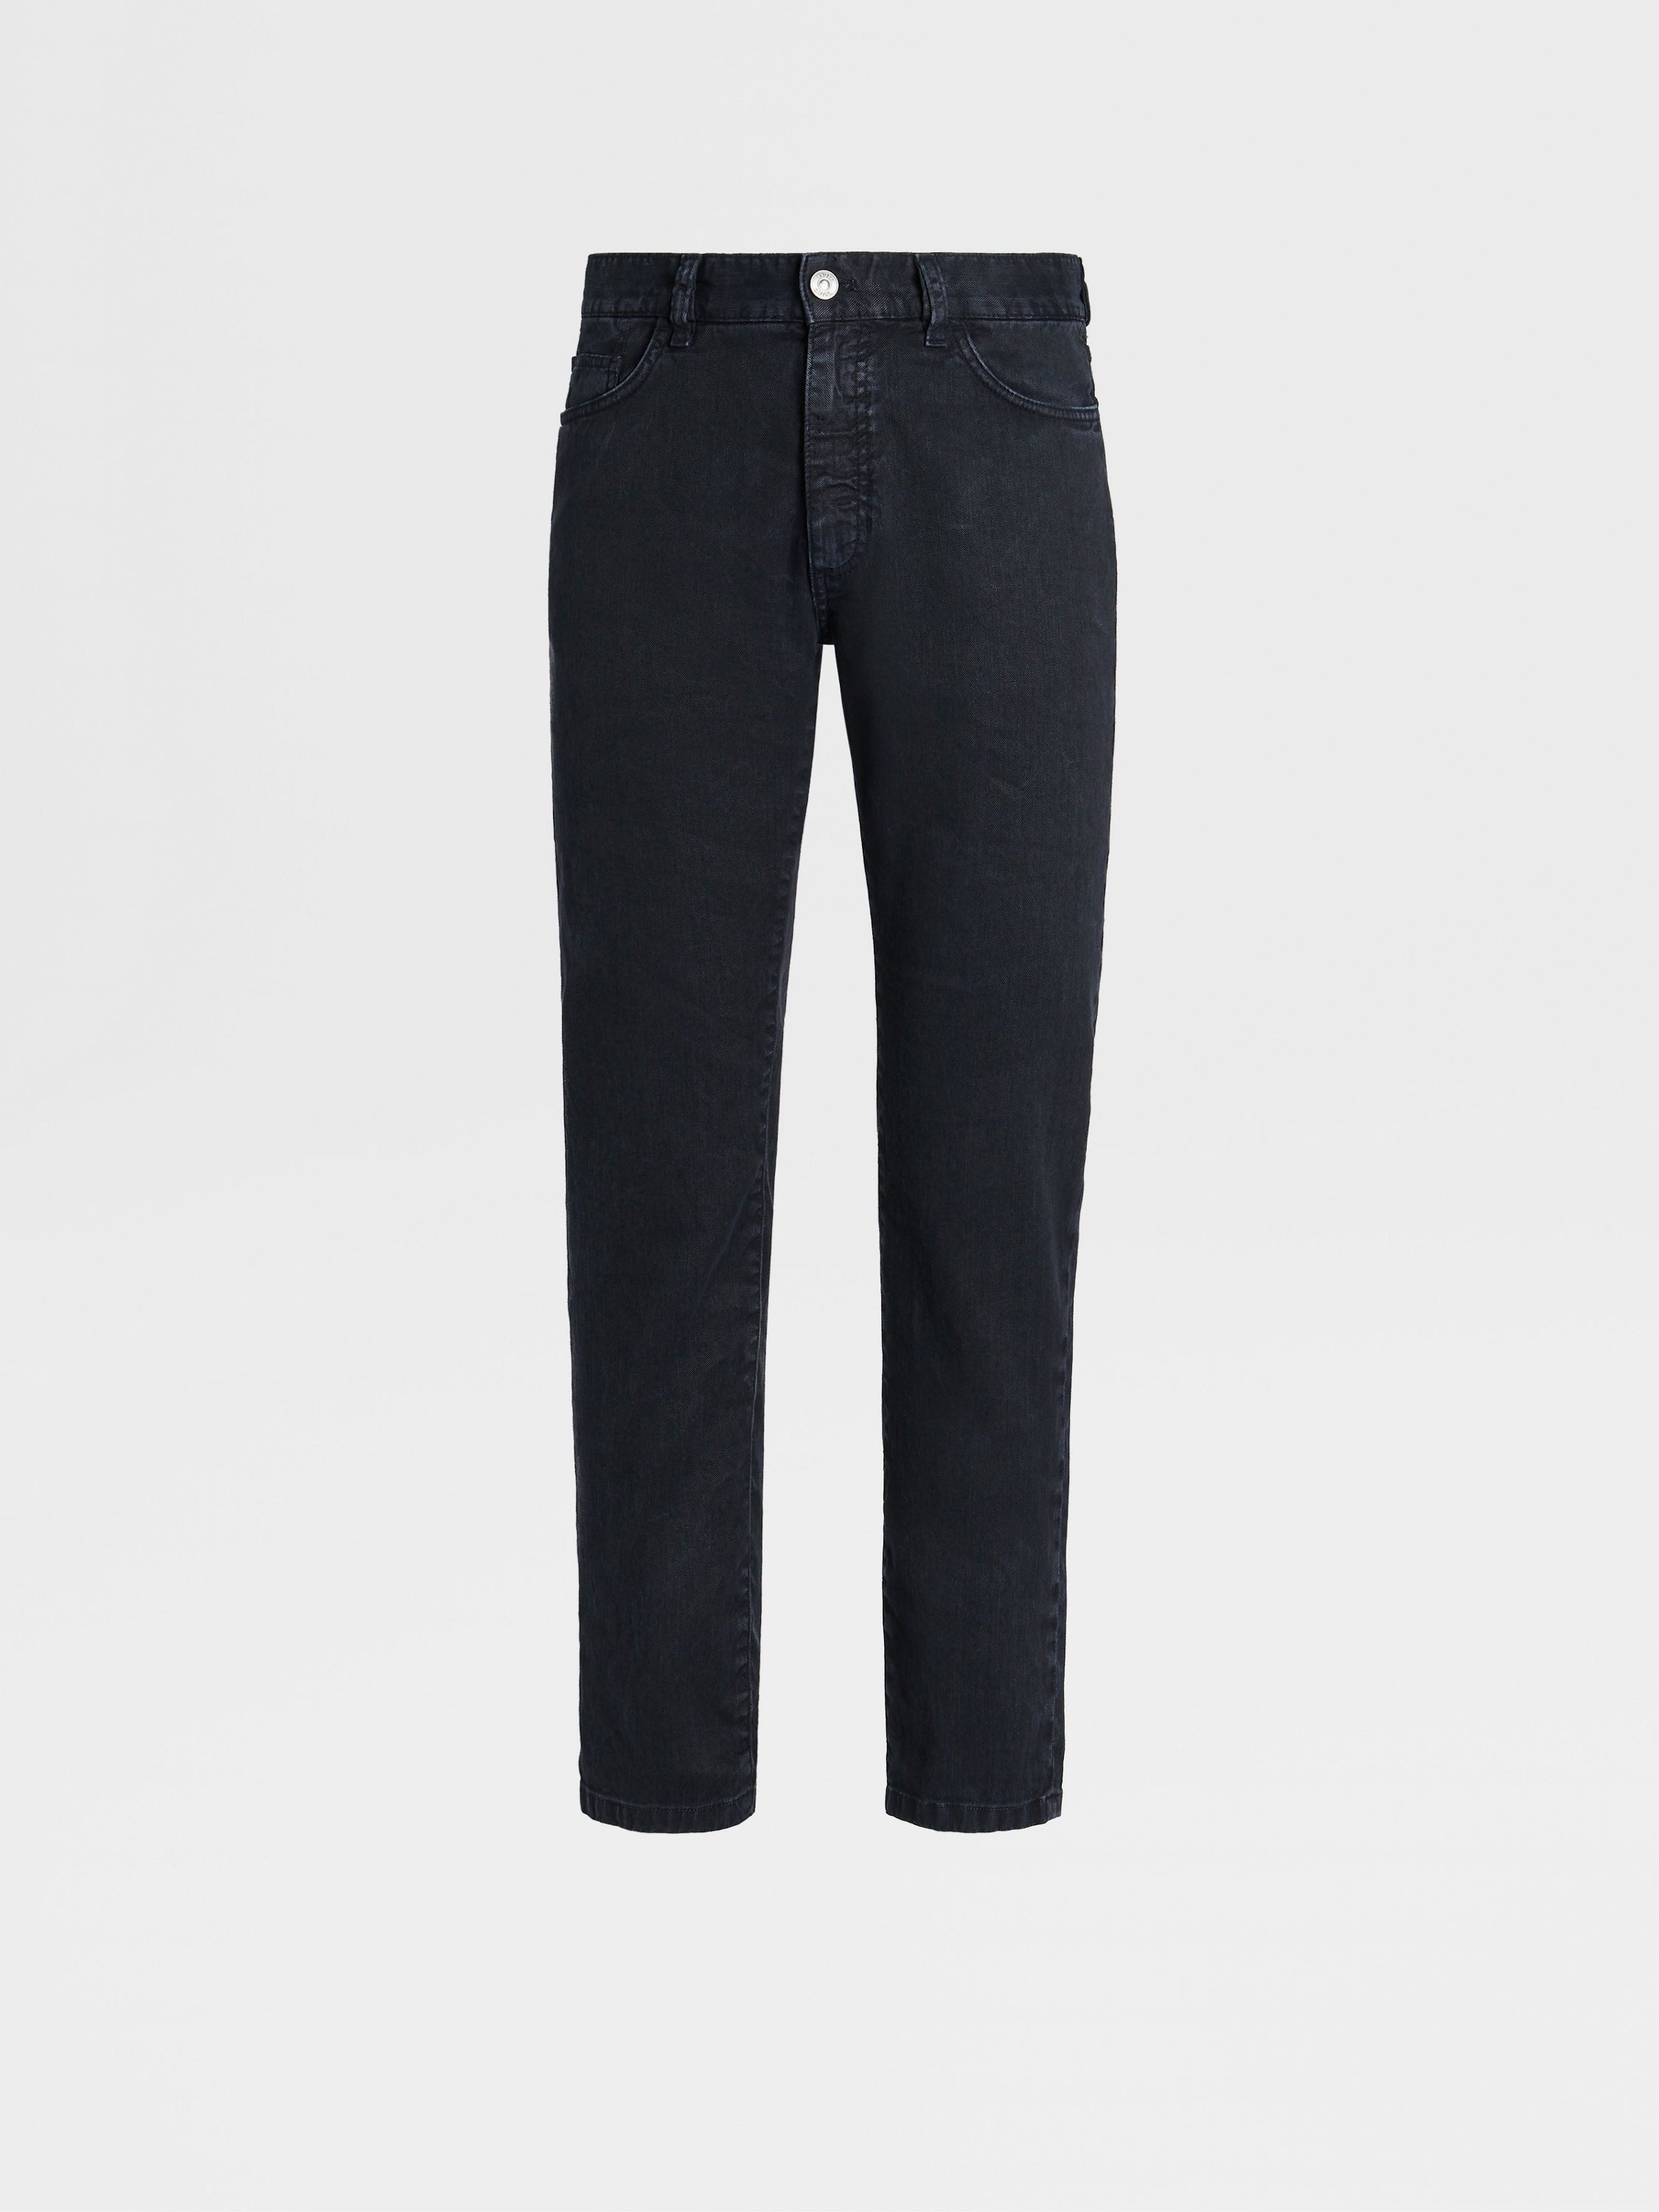 NAVY BLUE STRETCH LINEN AND COTTON JEANS - 1